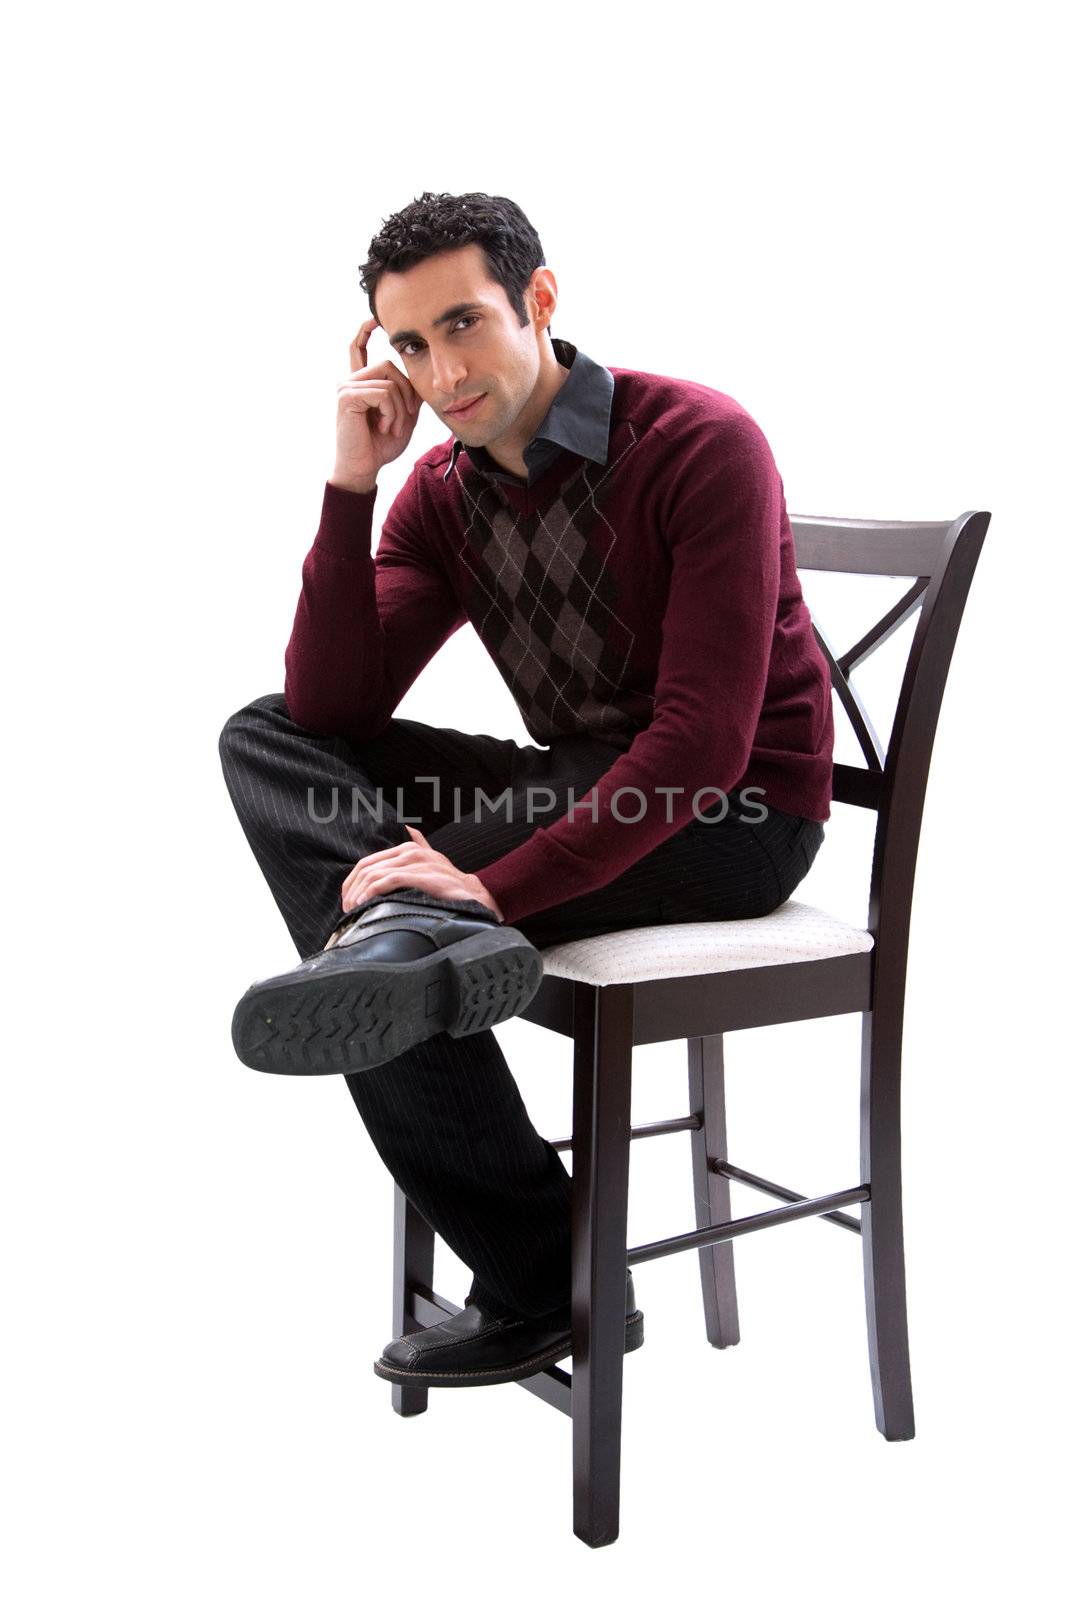 Handsome guy wearing business casual clothes sitting on a high chair and thinking, isolated